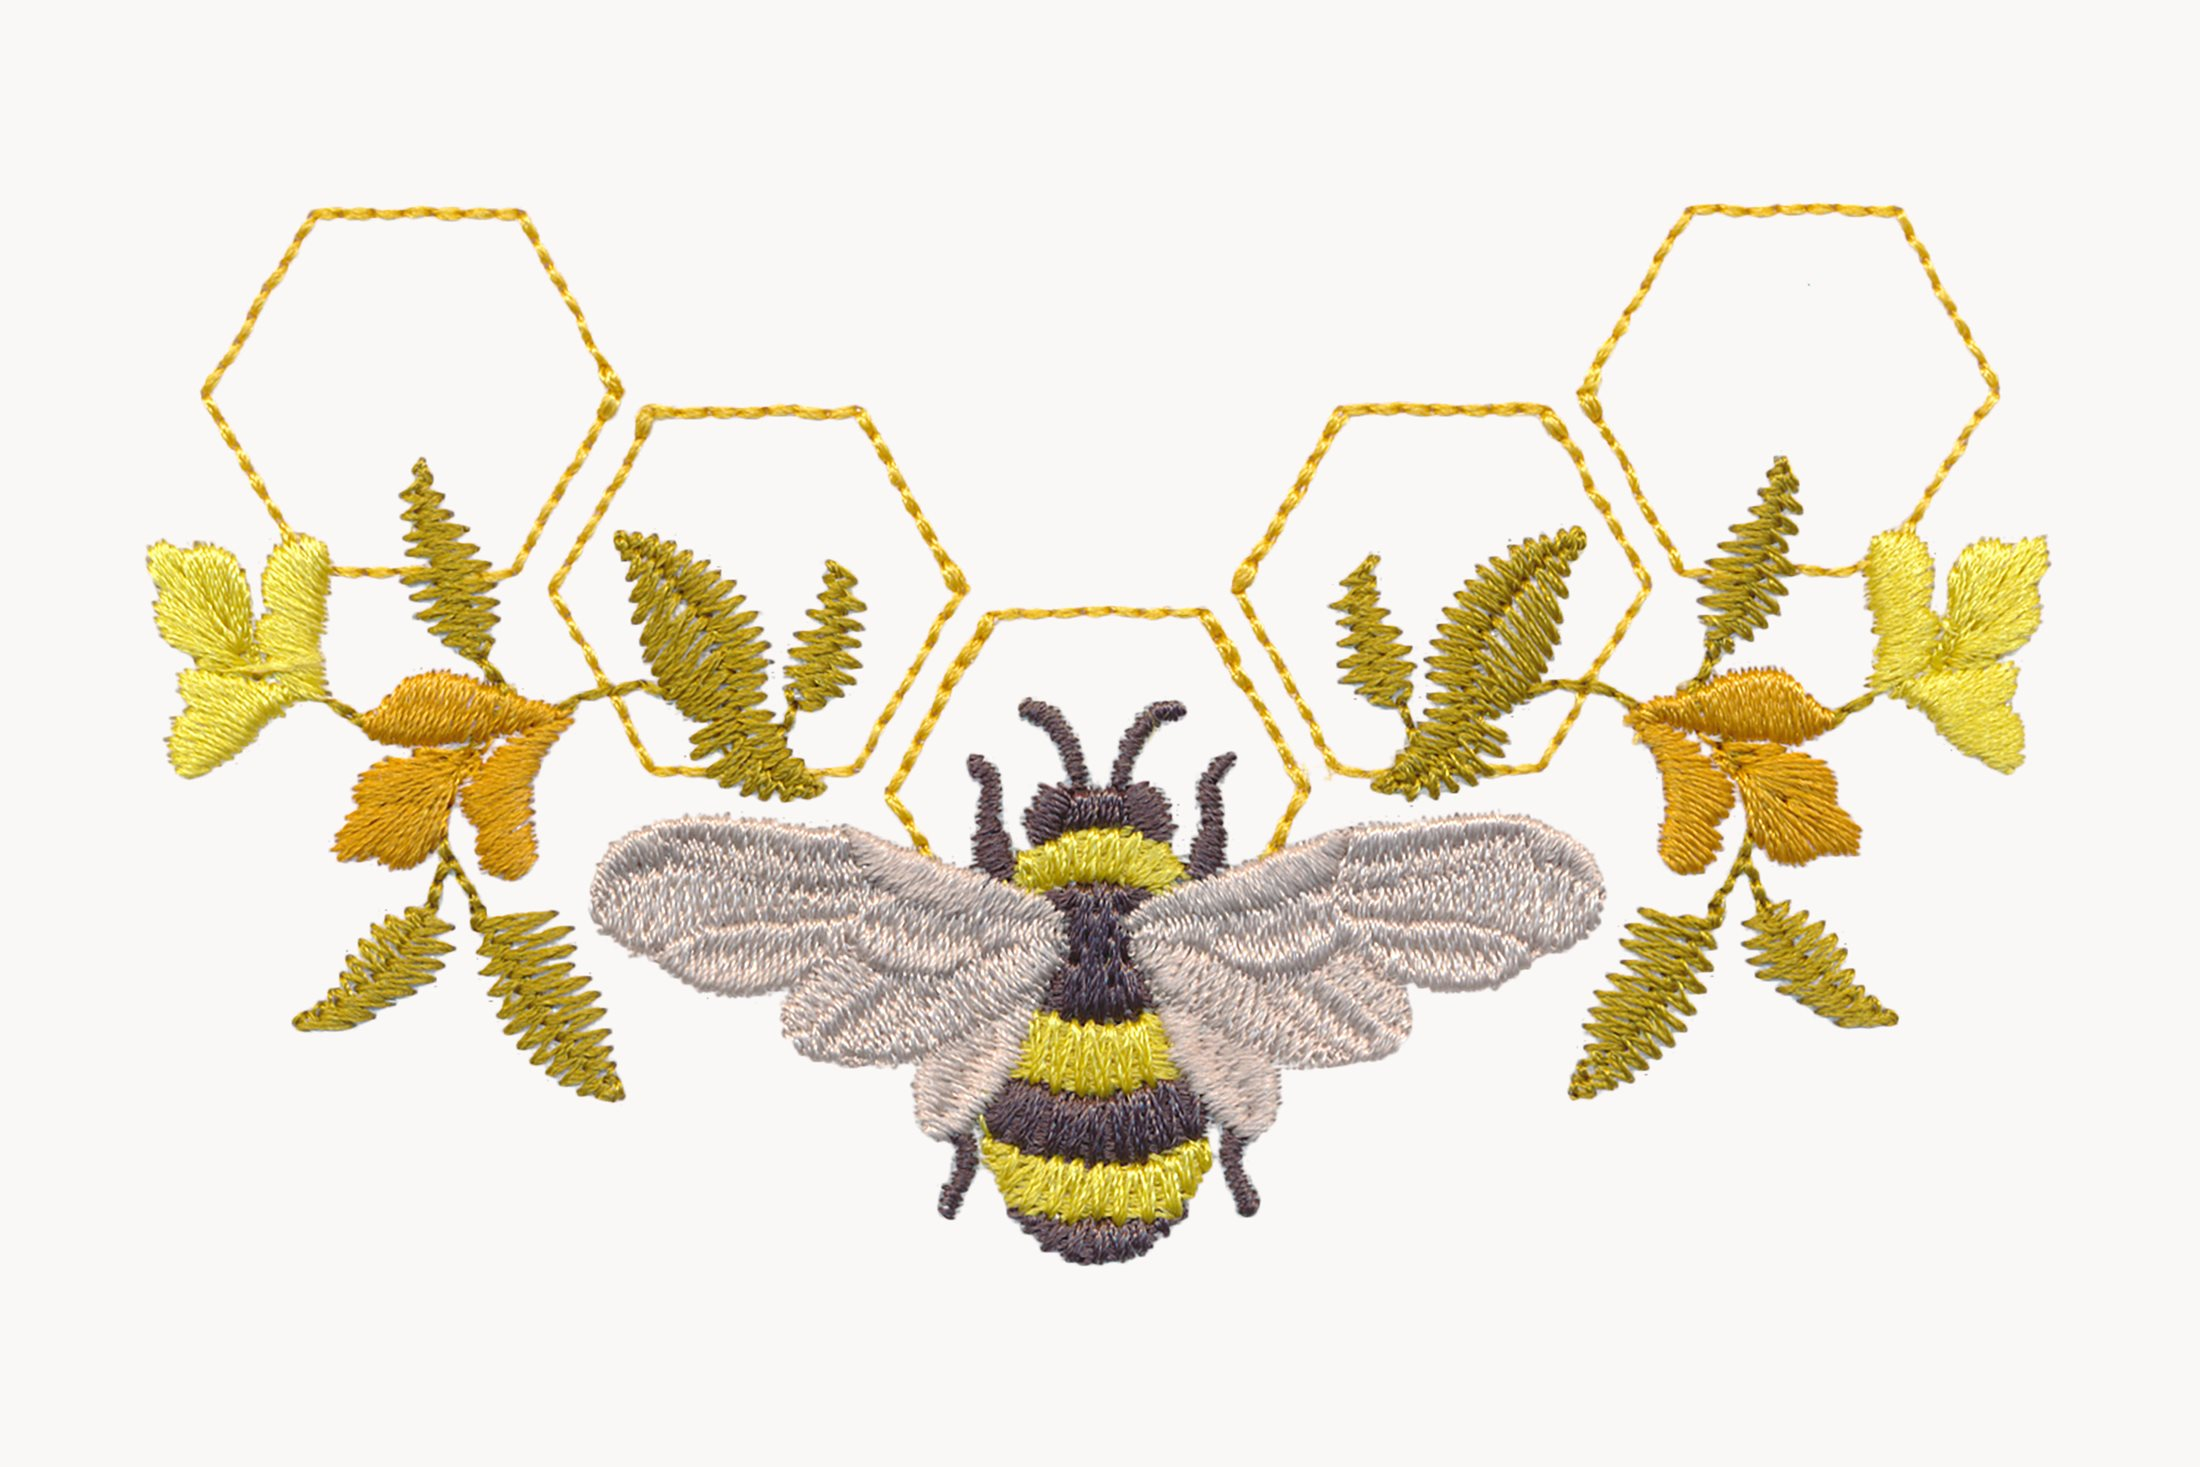 Bumble Bee Embroidery Pattern Bernina Exclusive Embroidery Collections Software Bernina